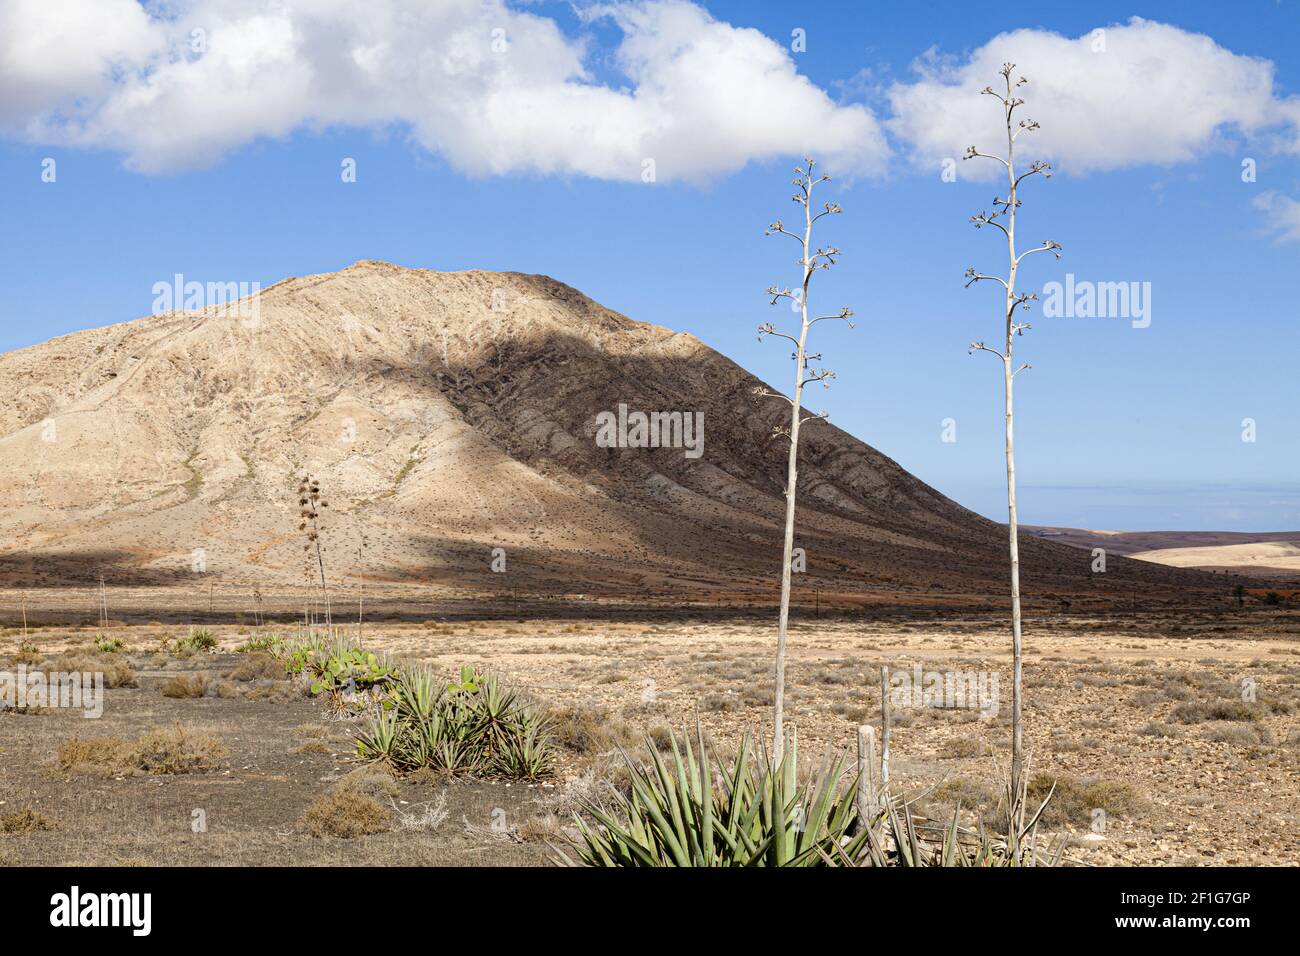 Mount Tindaya, Fuerteventura, Canary Islands. The mountain was considered sacred by the local islanders. Stock Photo